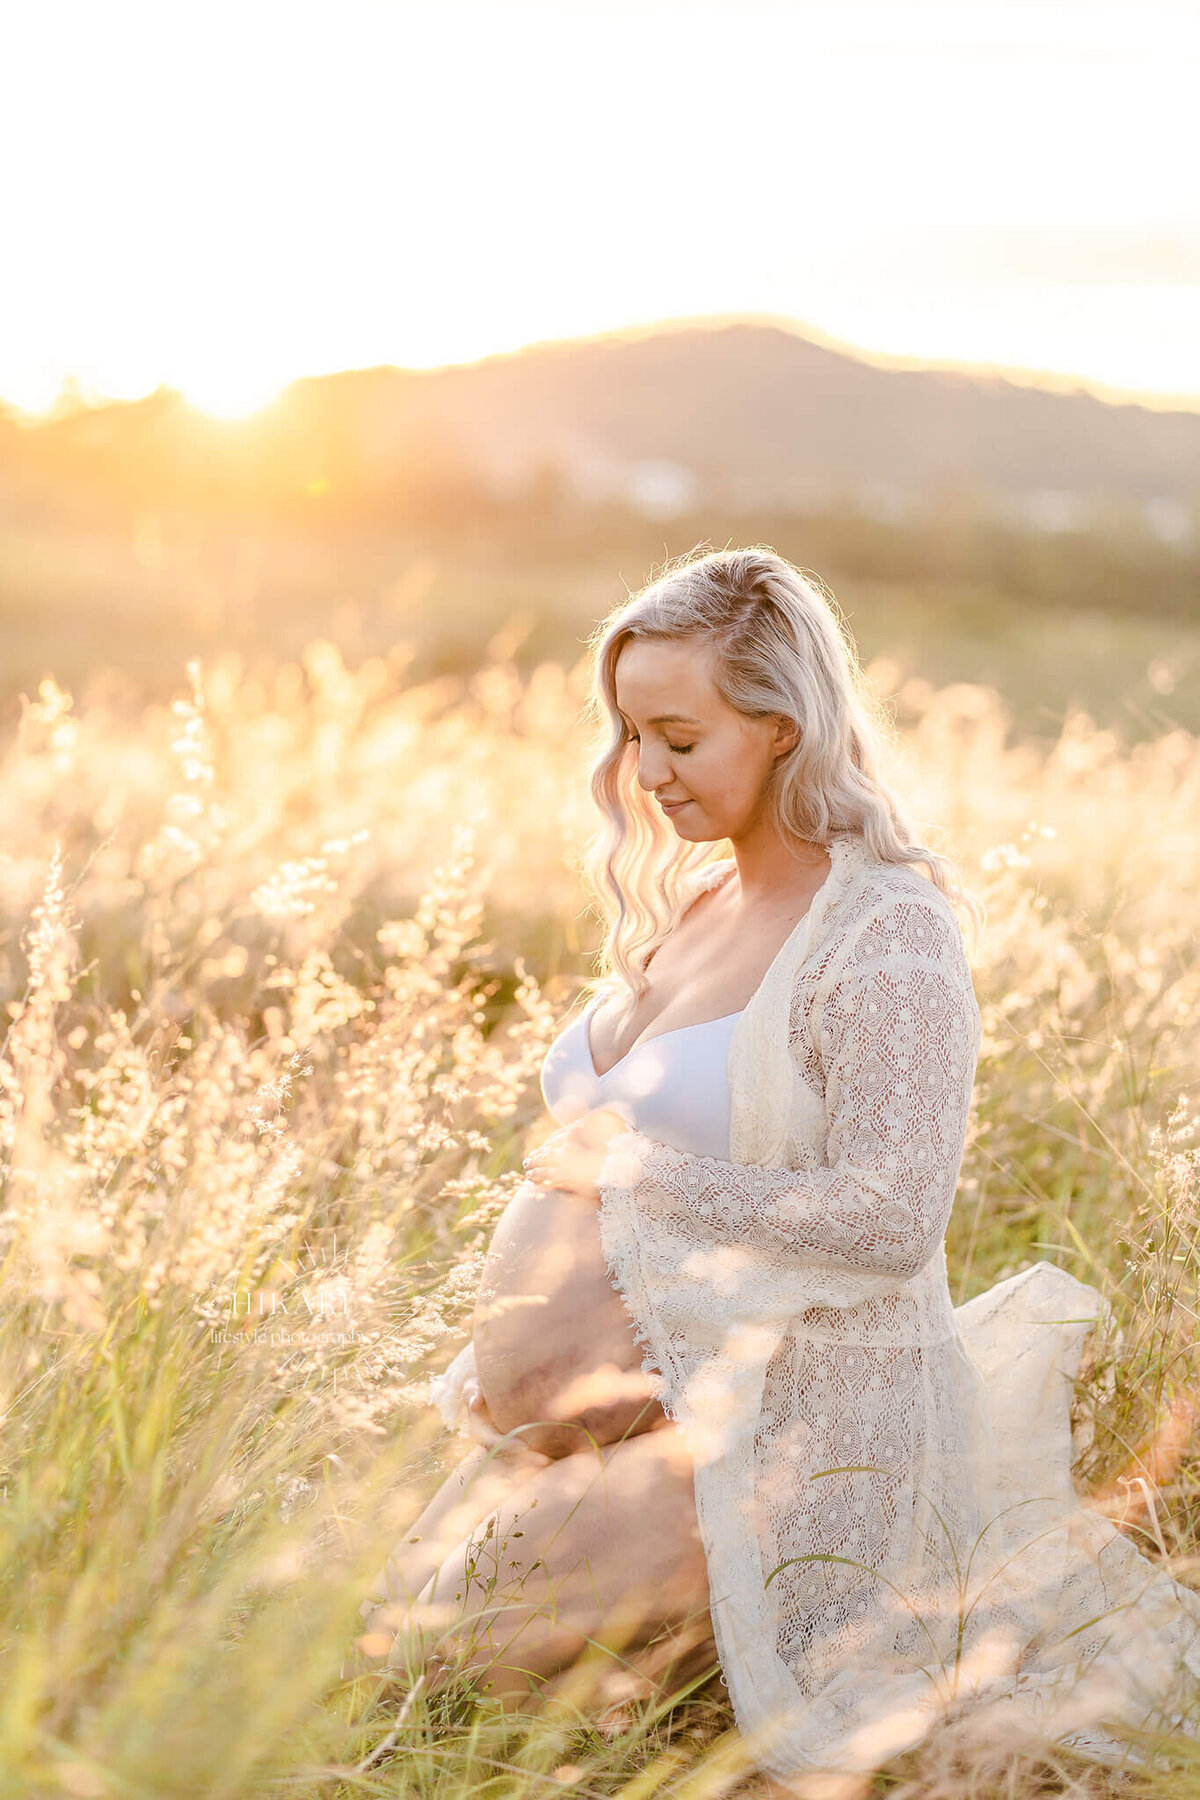 beautiful willow grassy field in gold coast hinterlands for private maternity photo session candid and relaxed.